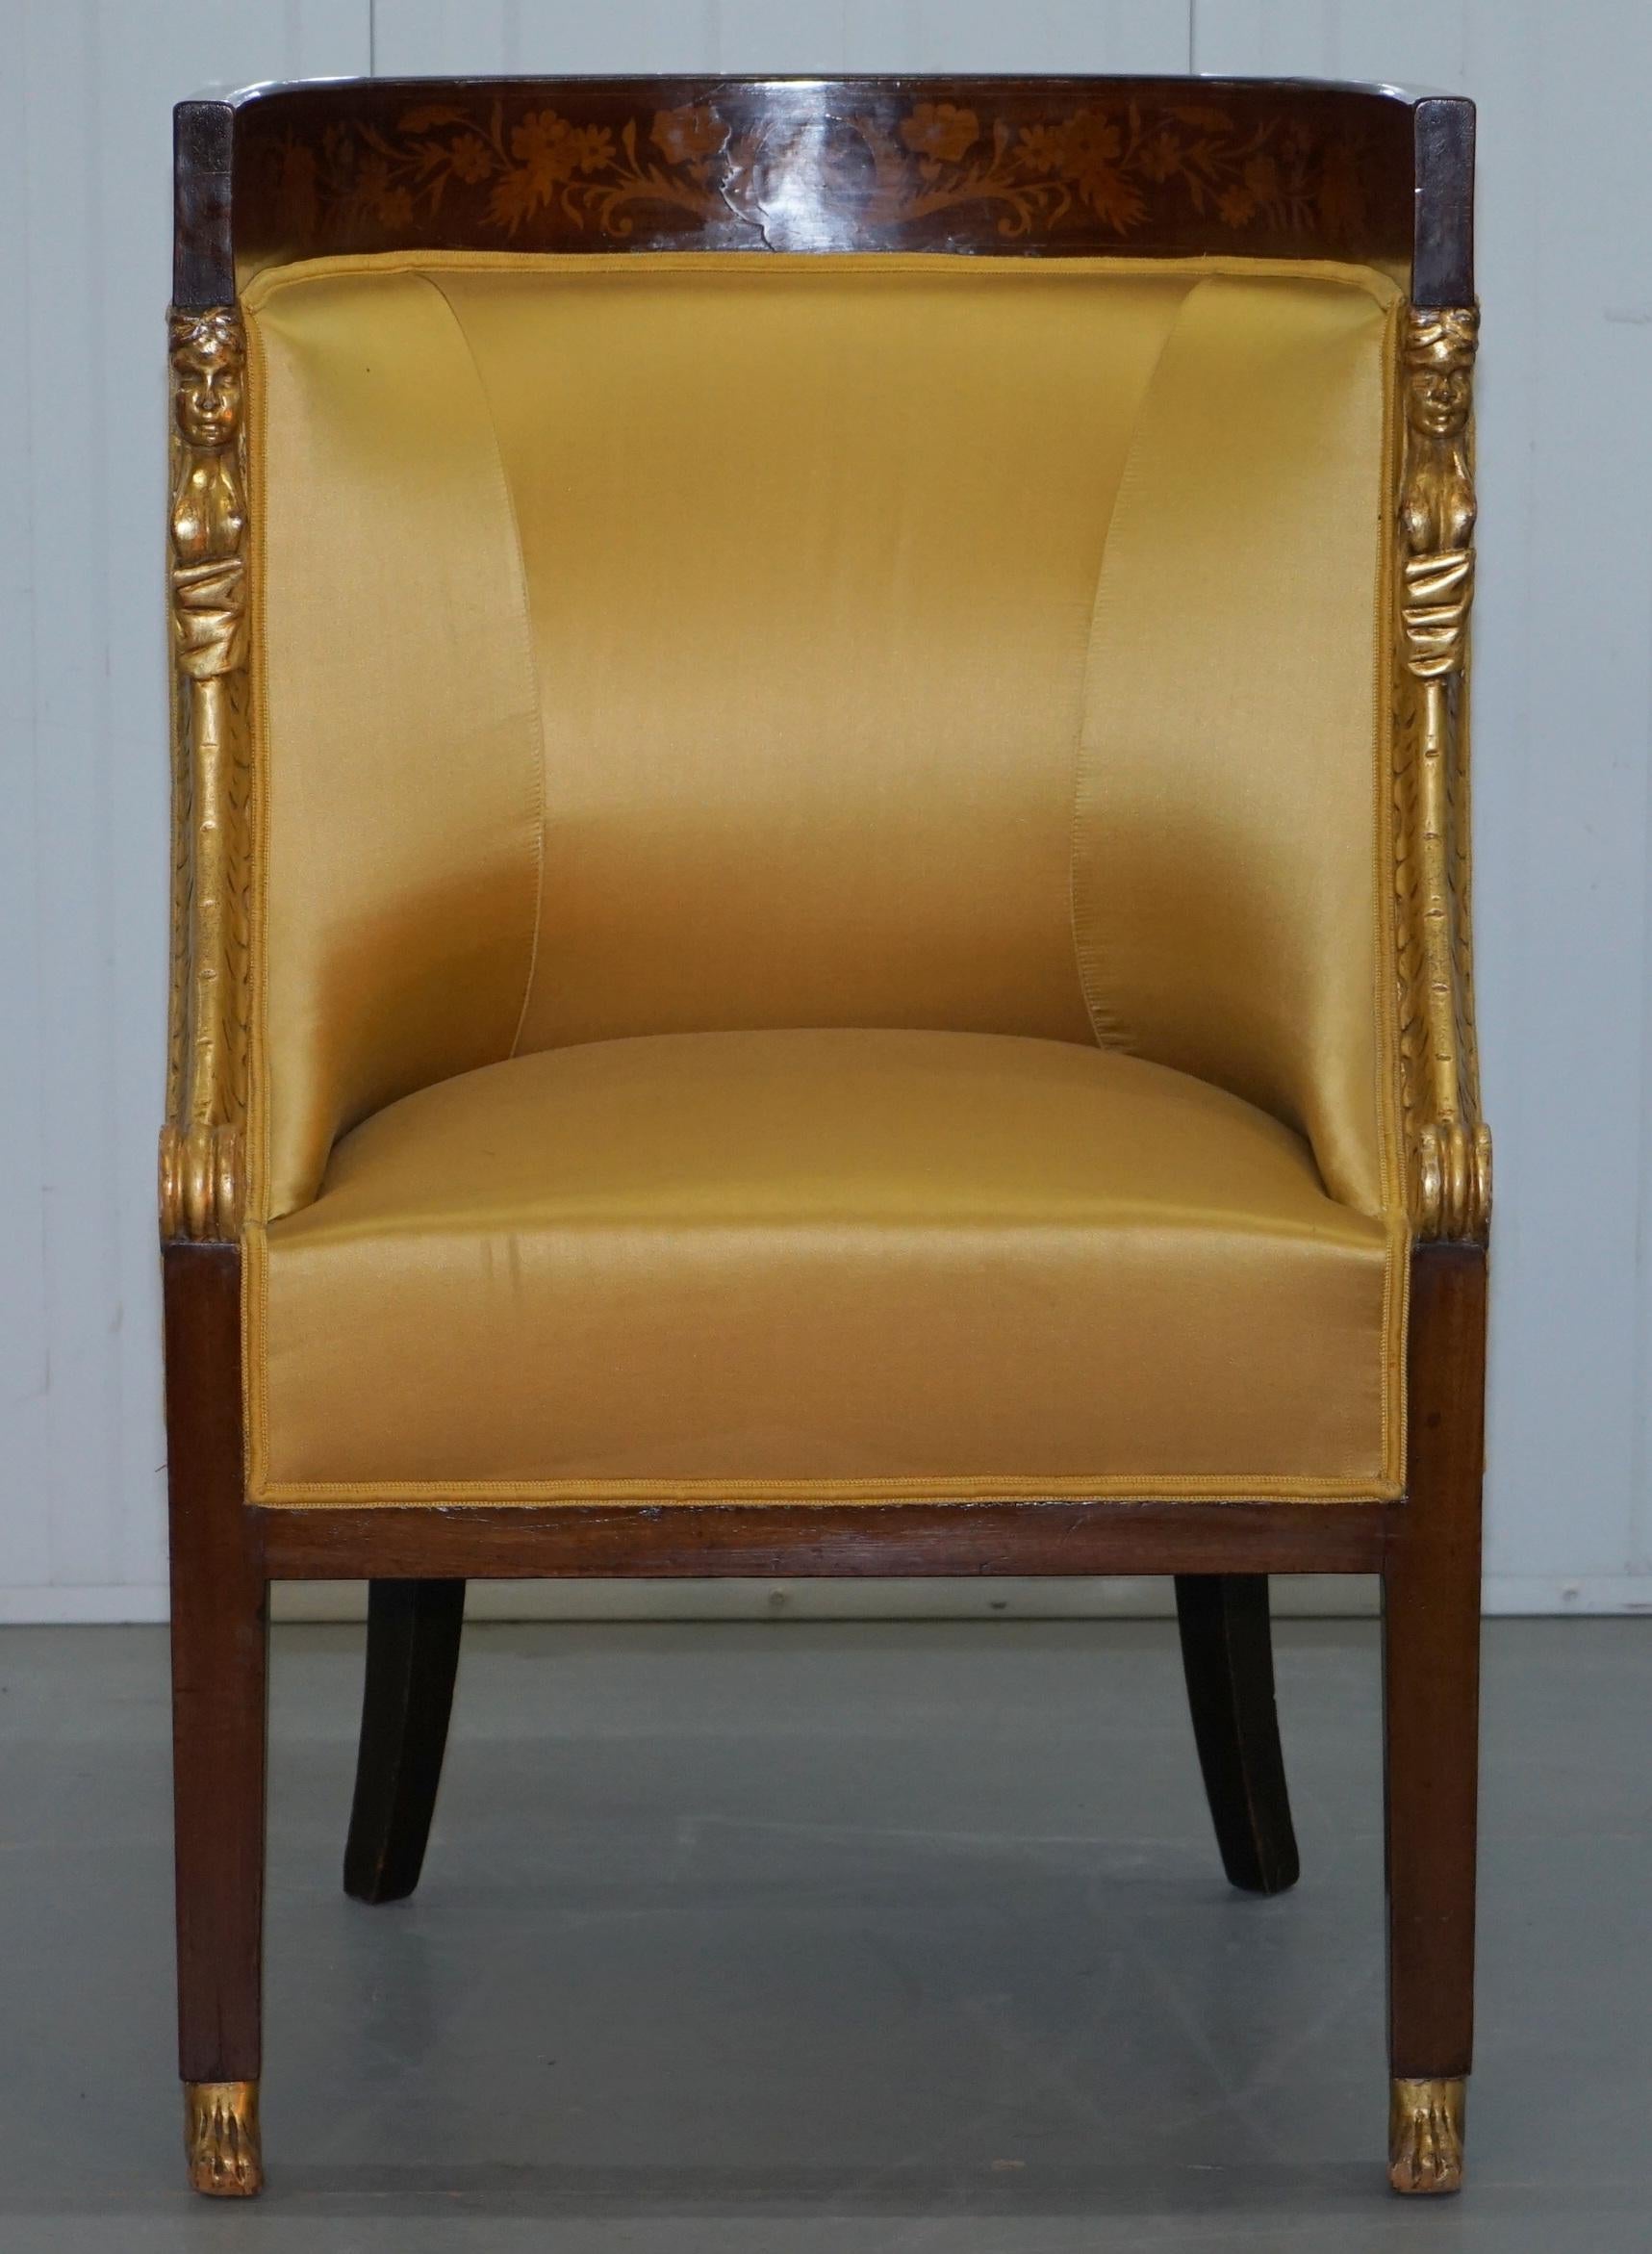 1870 French Empire Marquetry Inlaid Suite Berger Armchairs & Settee Canape, Pair For Sale 9